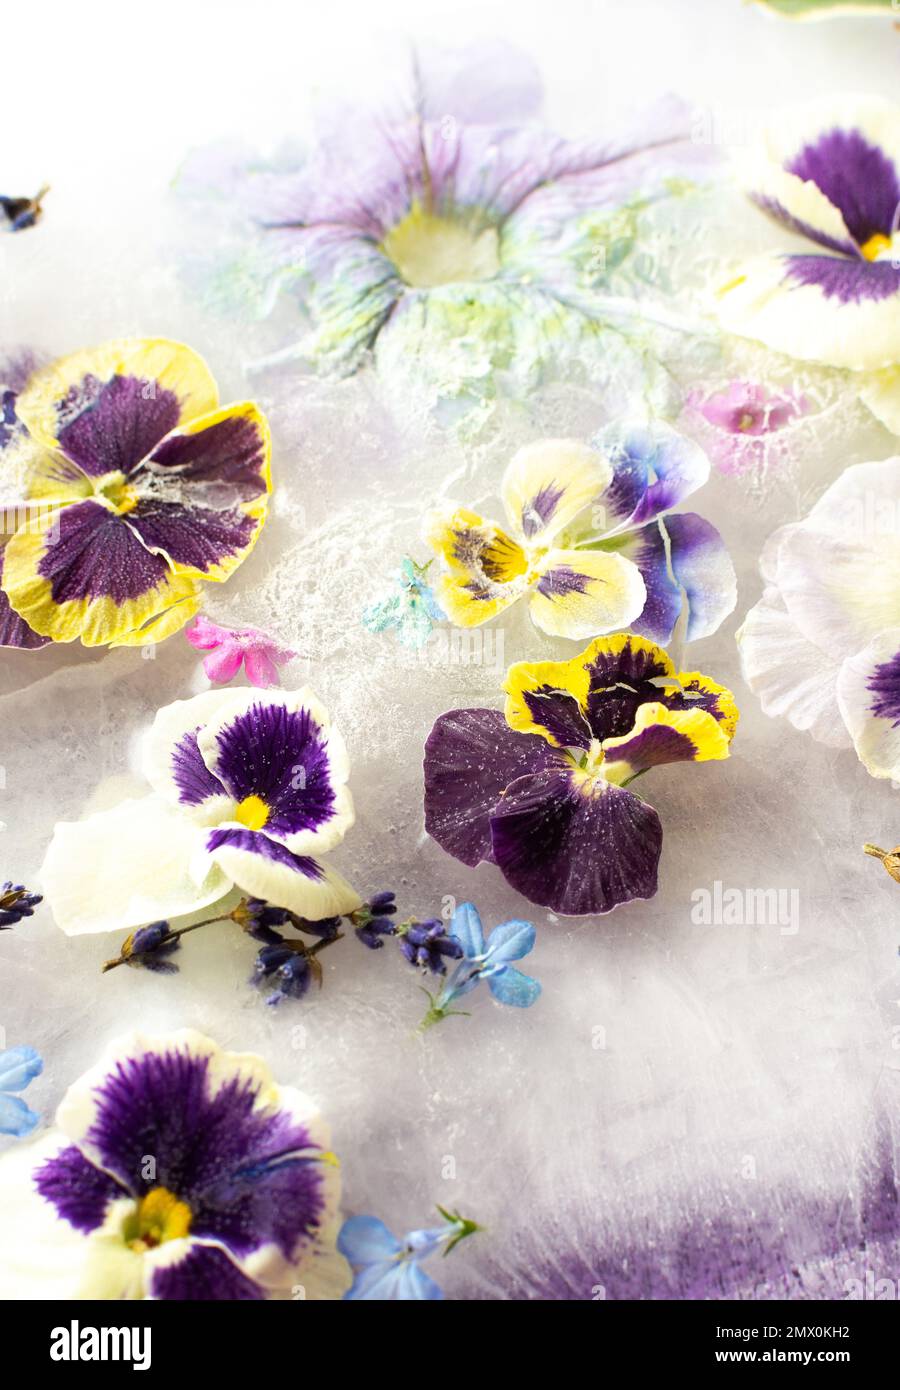 Summer background of frozen flowers in ice, colorful pansies and geraniums, lavender and Verbena Stock Photo